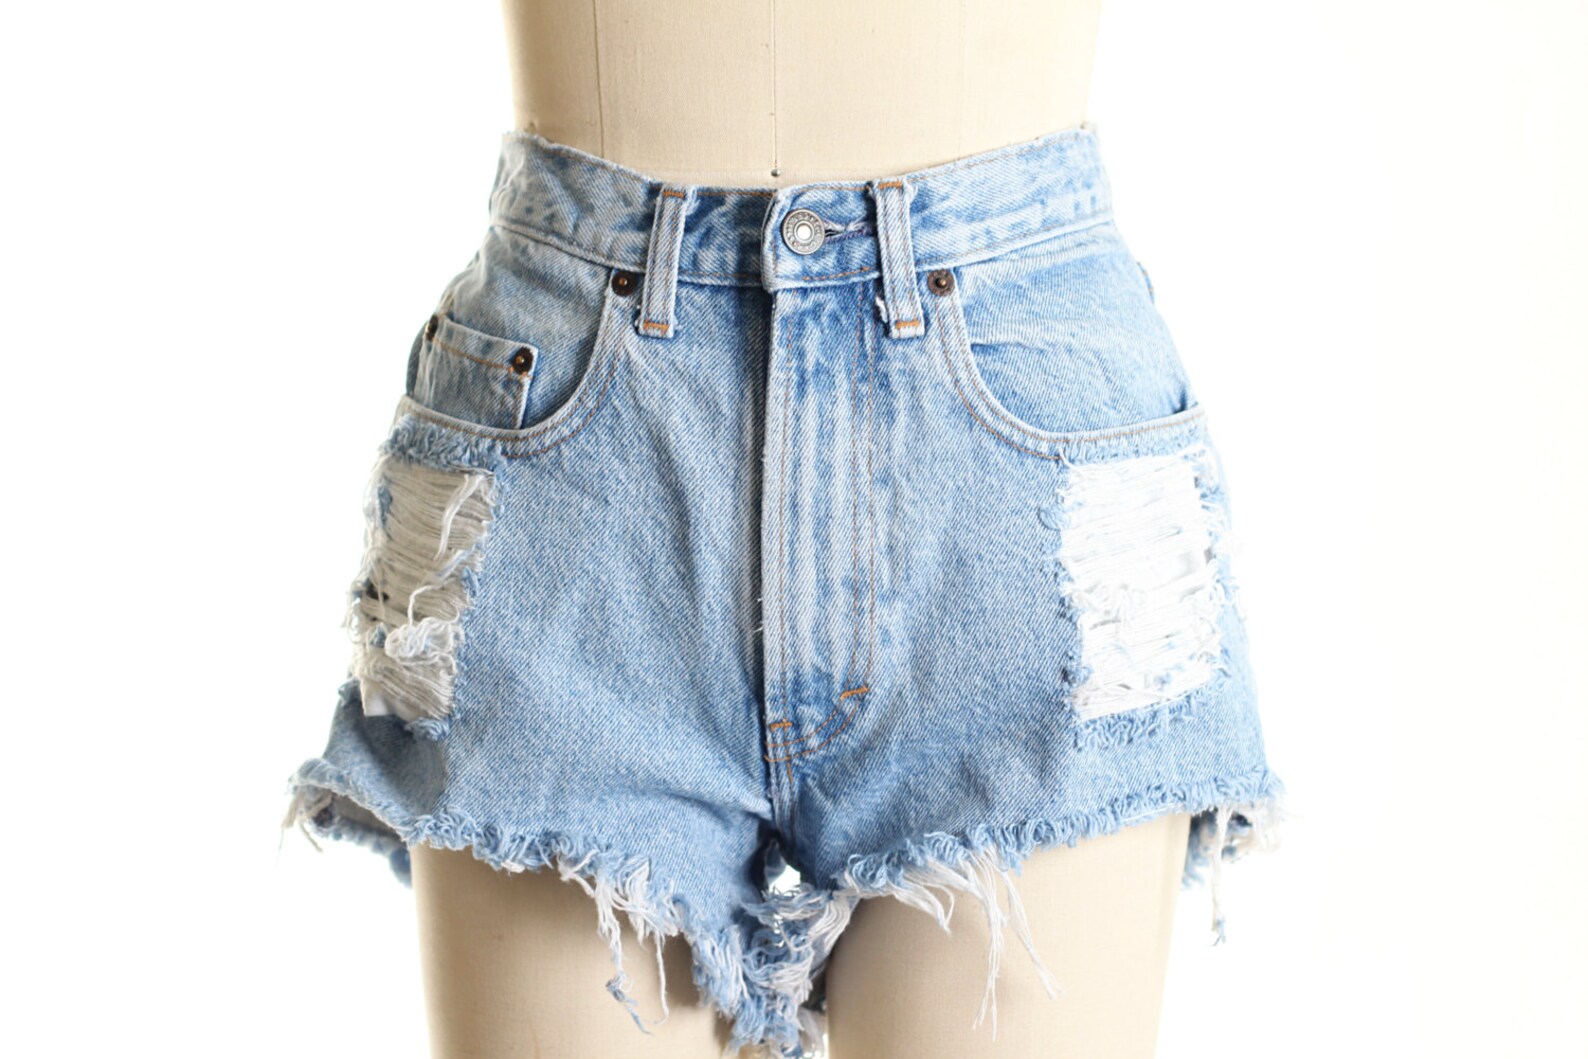 Custom Made Destroyed Dirty Ripped Distress Daisy Dukes High - Etsy